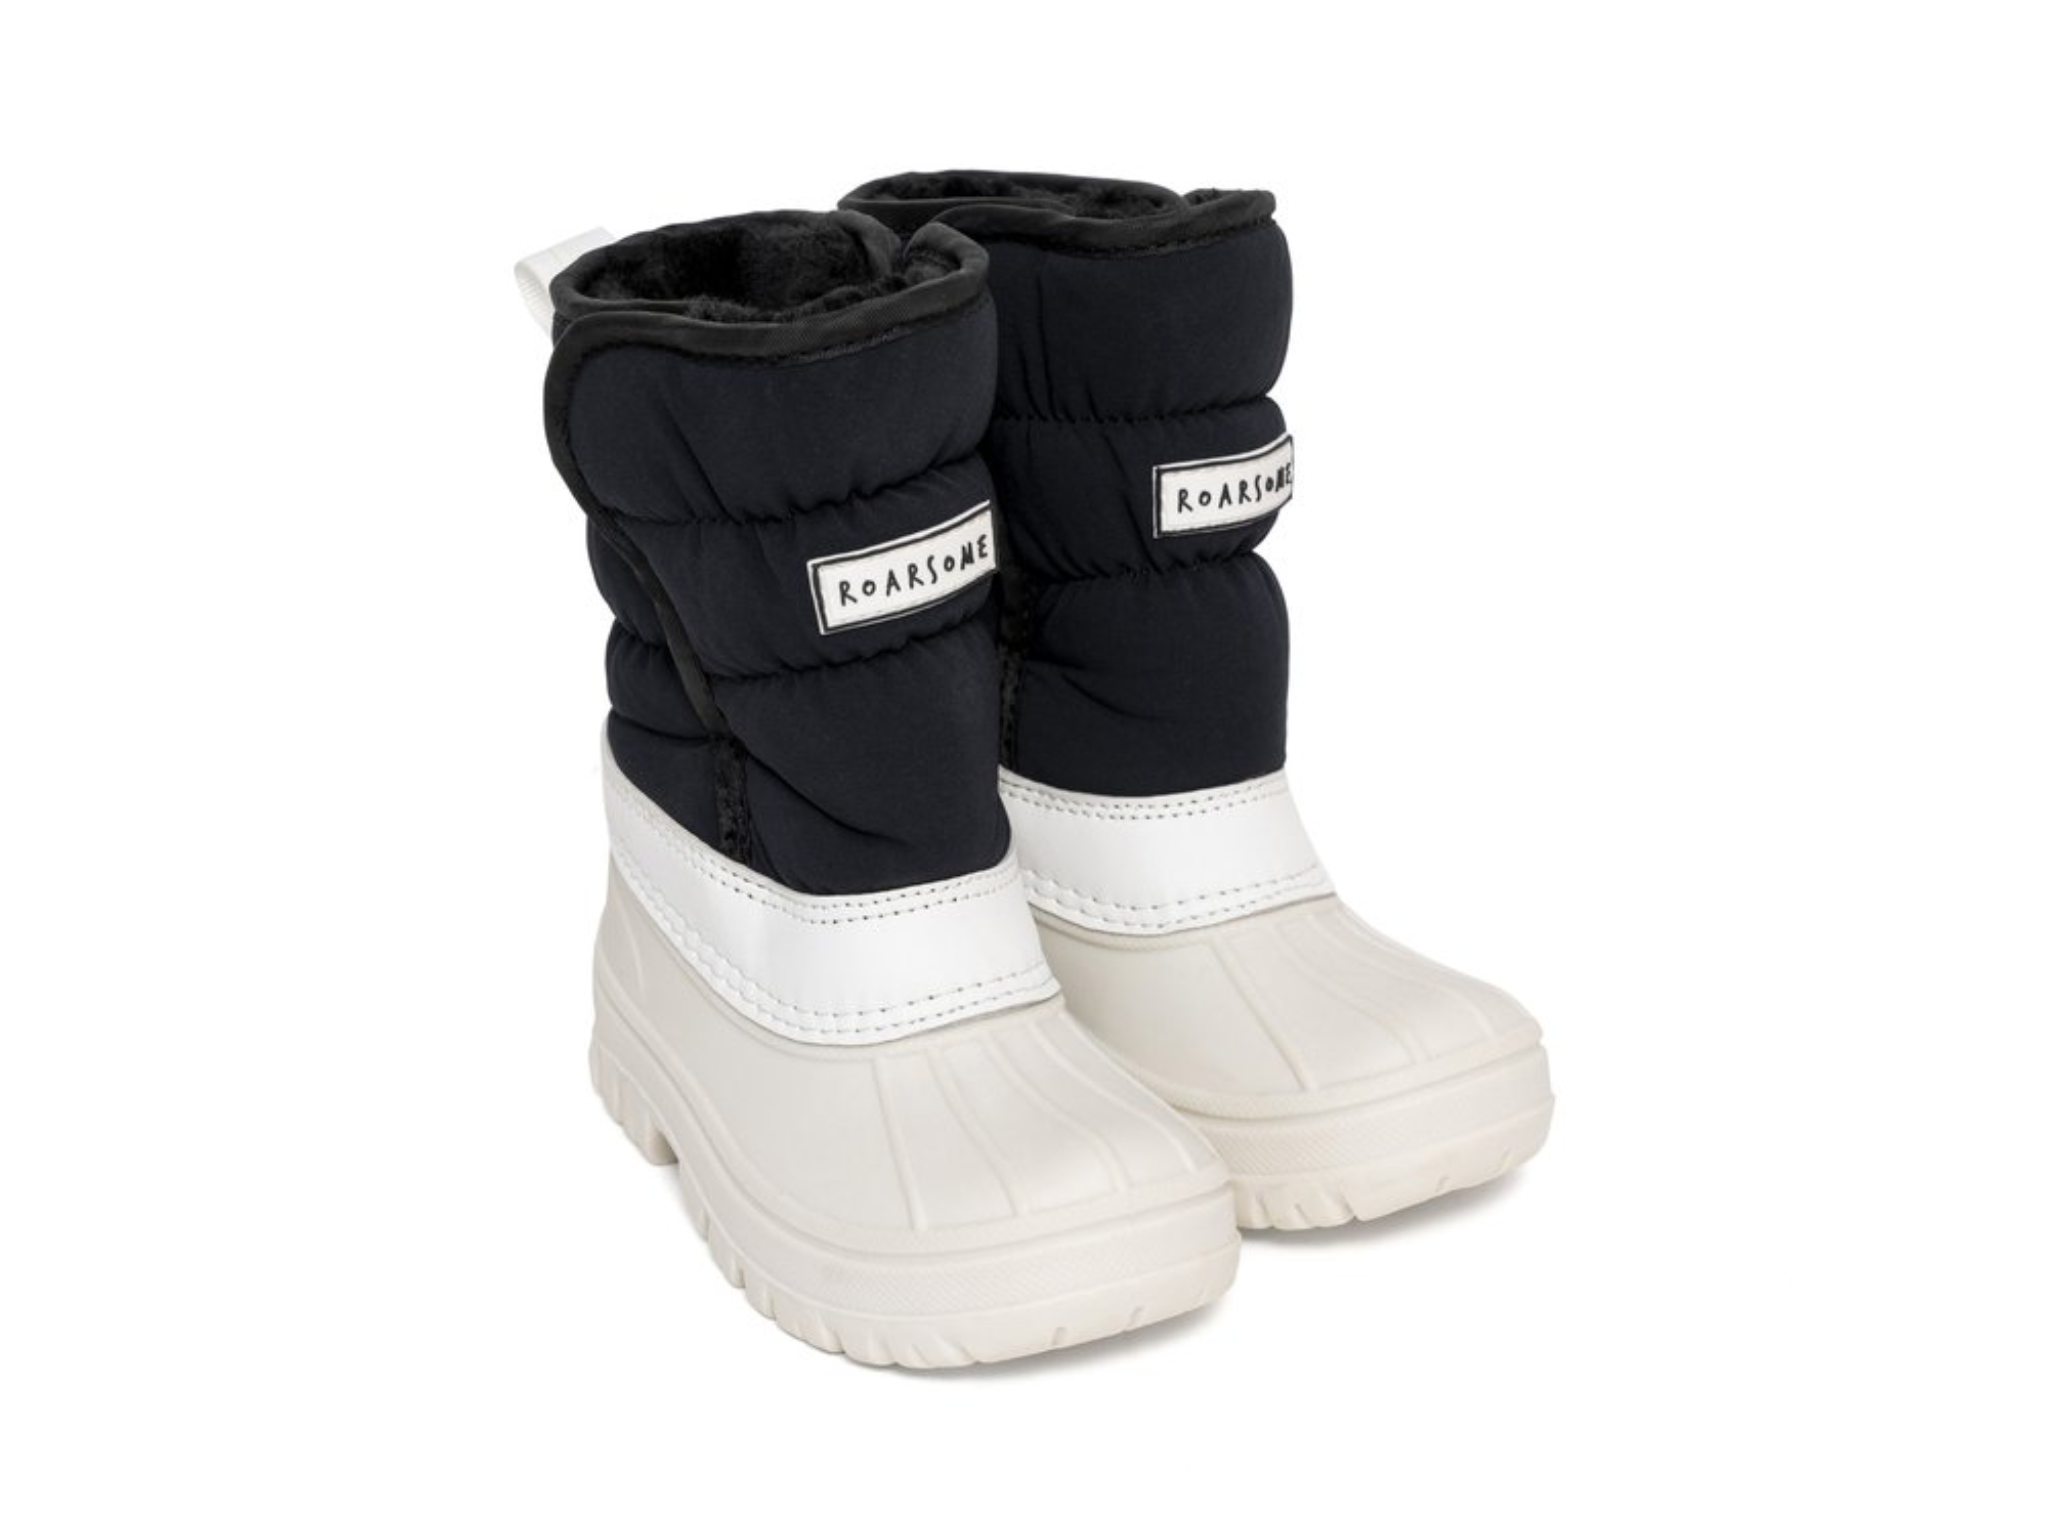 Roarsome Winter Snow Boots-indybest